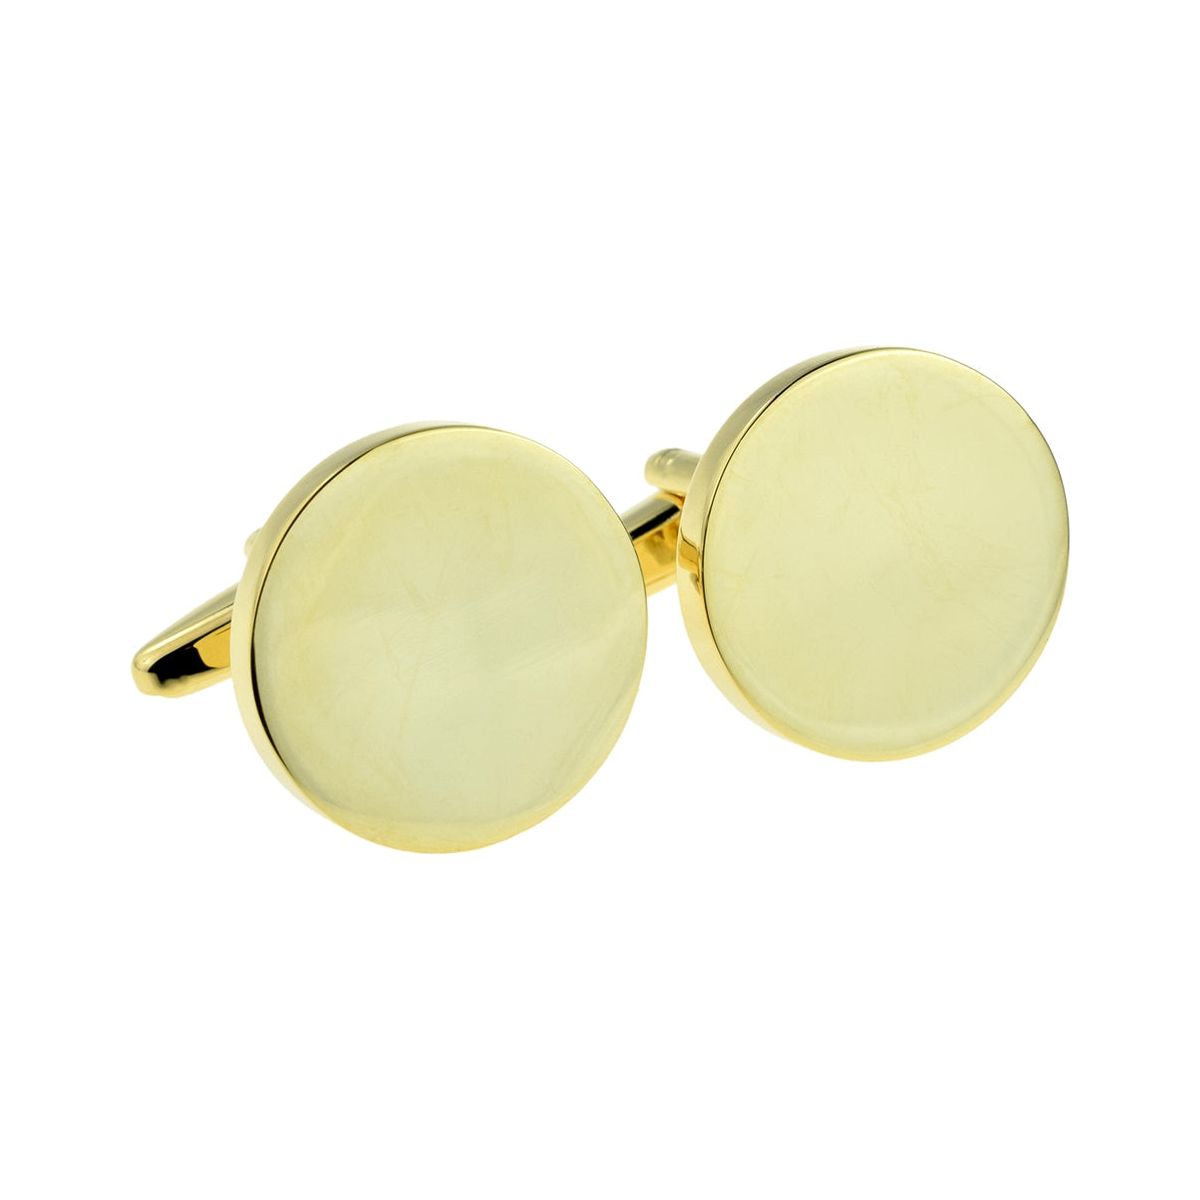 Engraved Deluxe Gold Round Cufflinks - Ashton and Finch